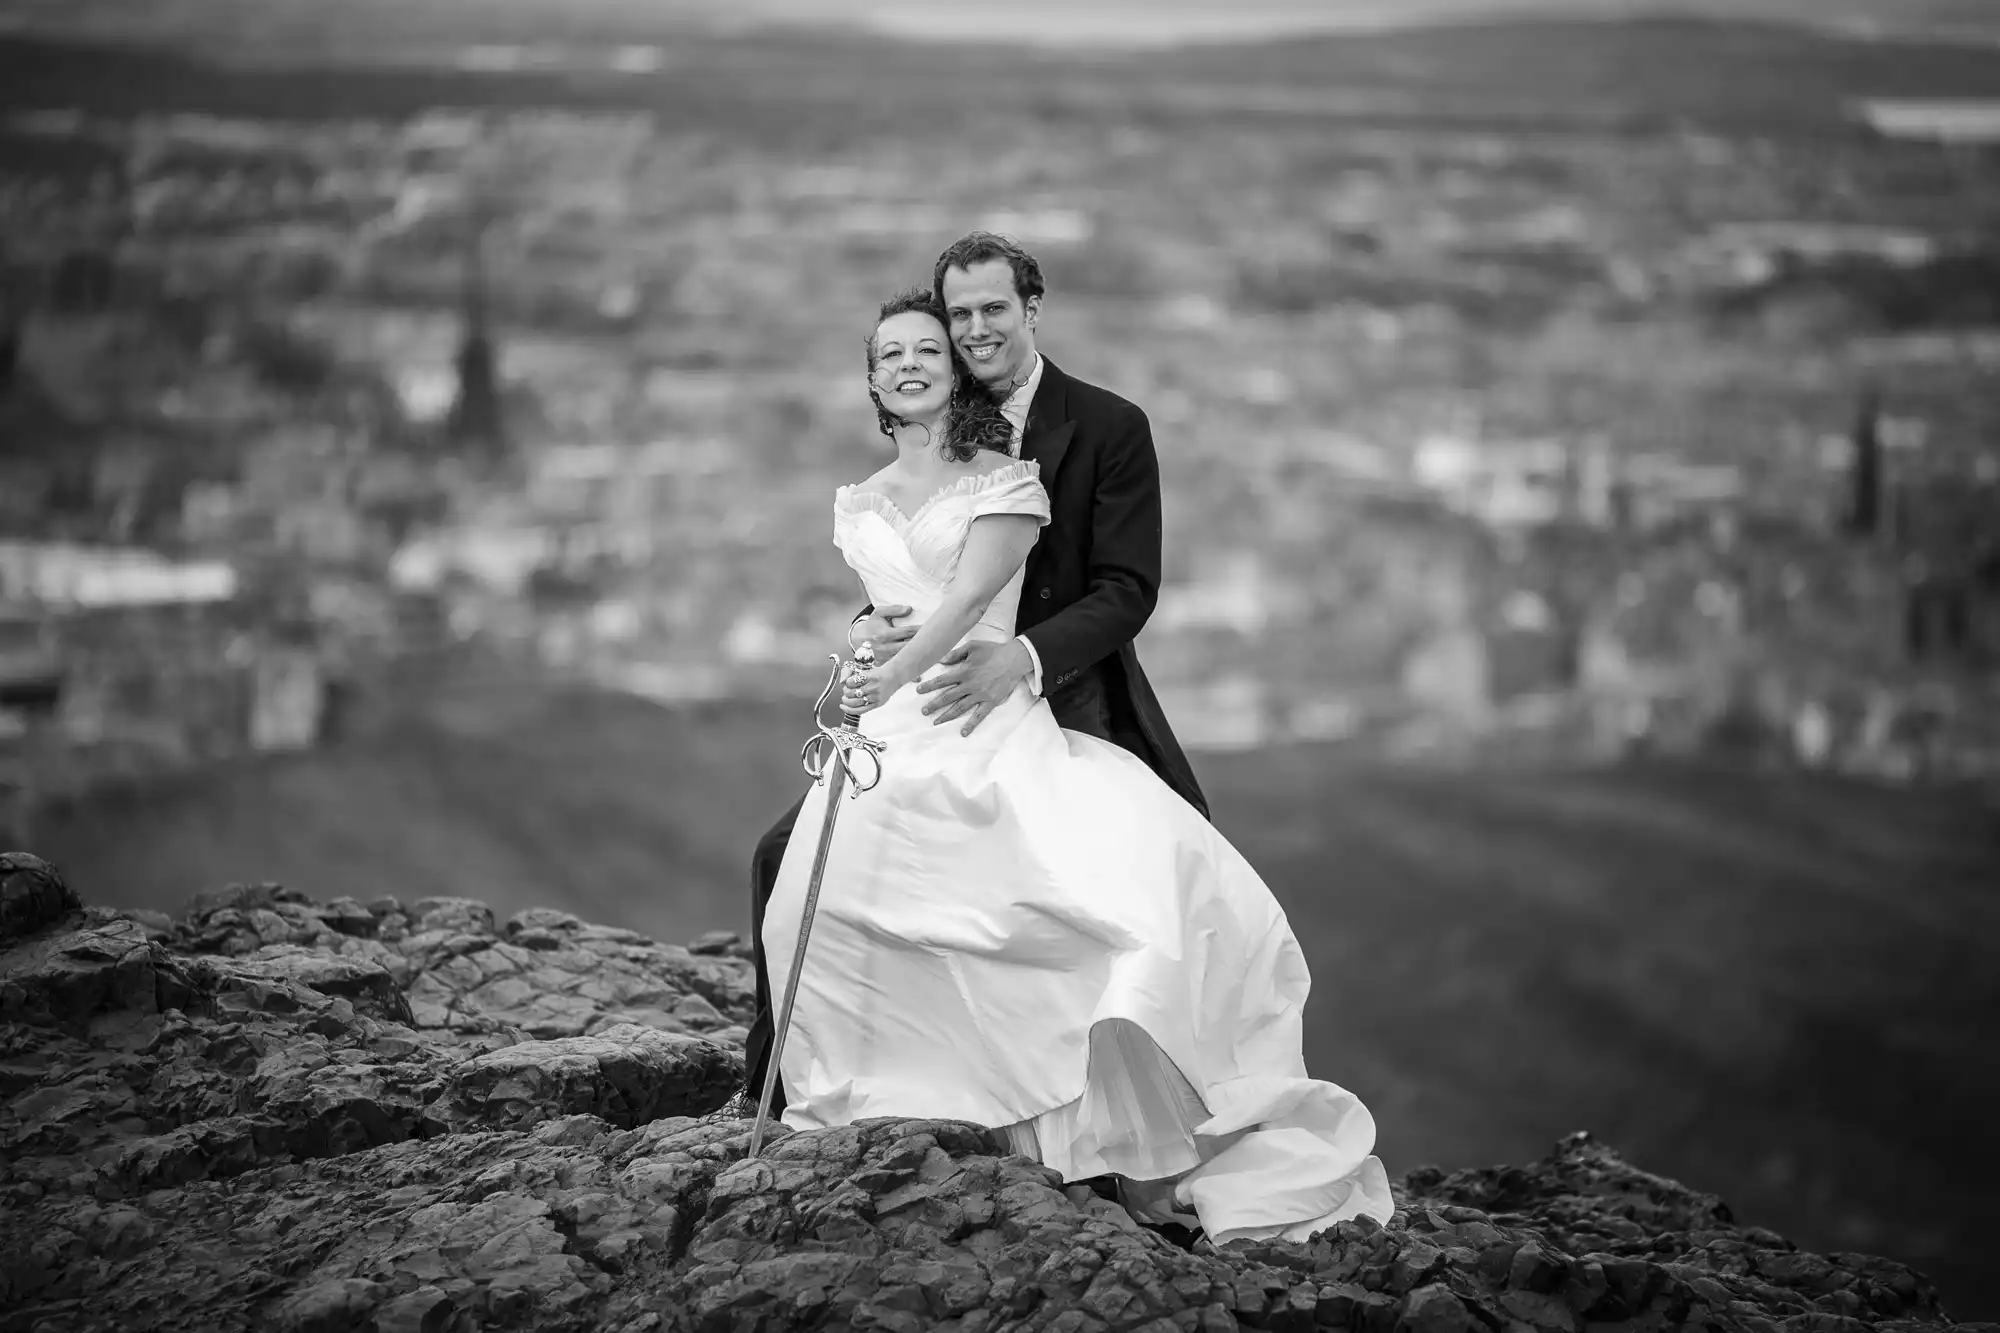 A black and white image of a bride and groom smiling and standing on rocky terrain with a blurred cityscape in the background.